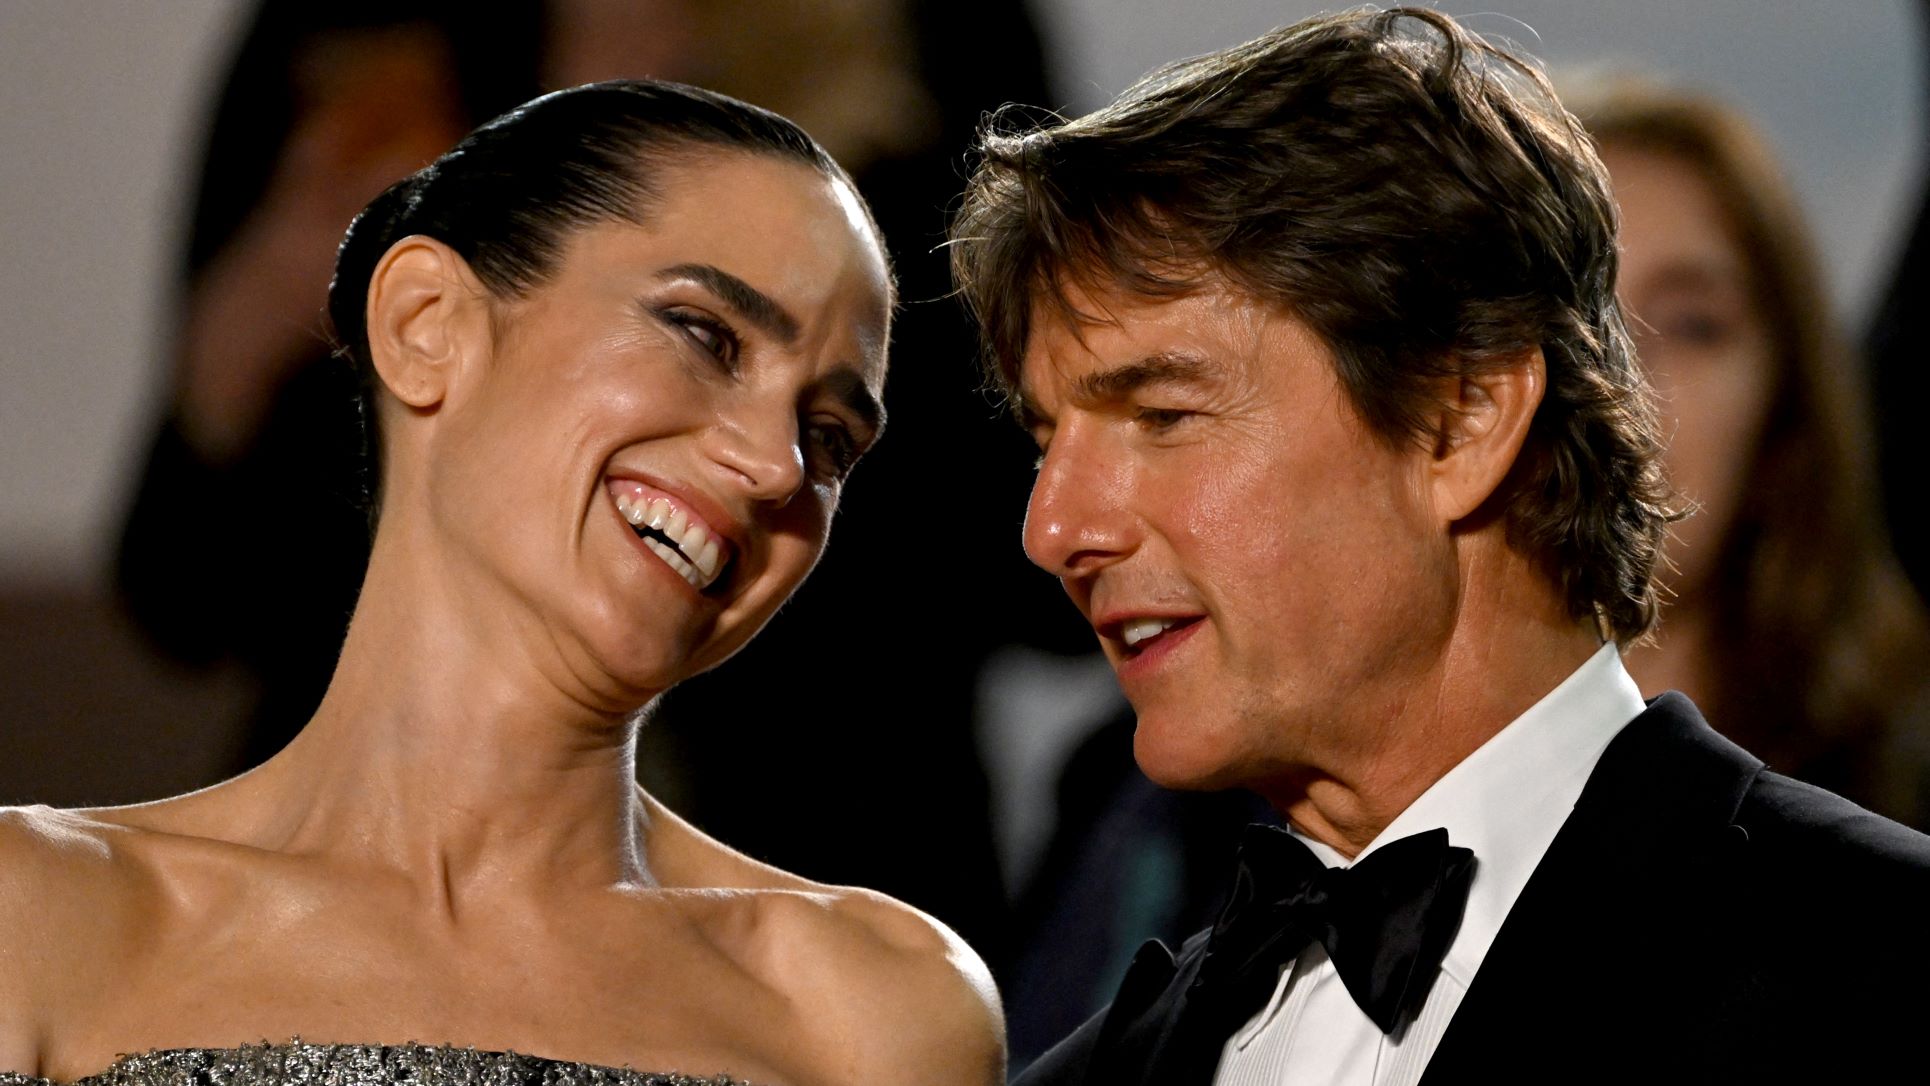 cannes-tom-cruise-jennifer-connelly-patricia-de-melo-moreira-afp-may-22